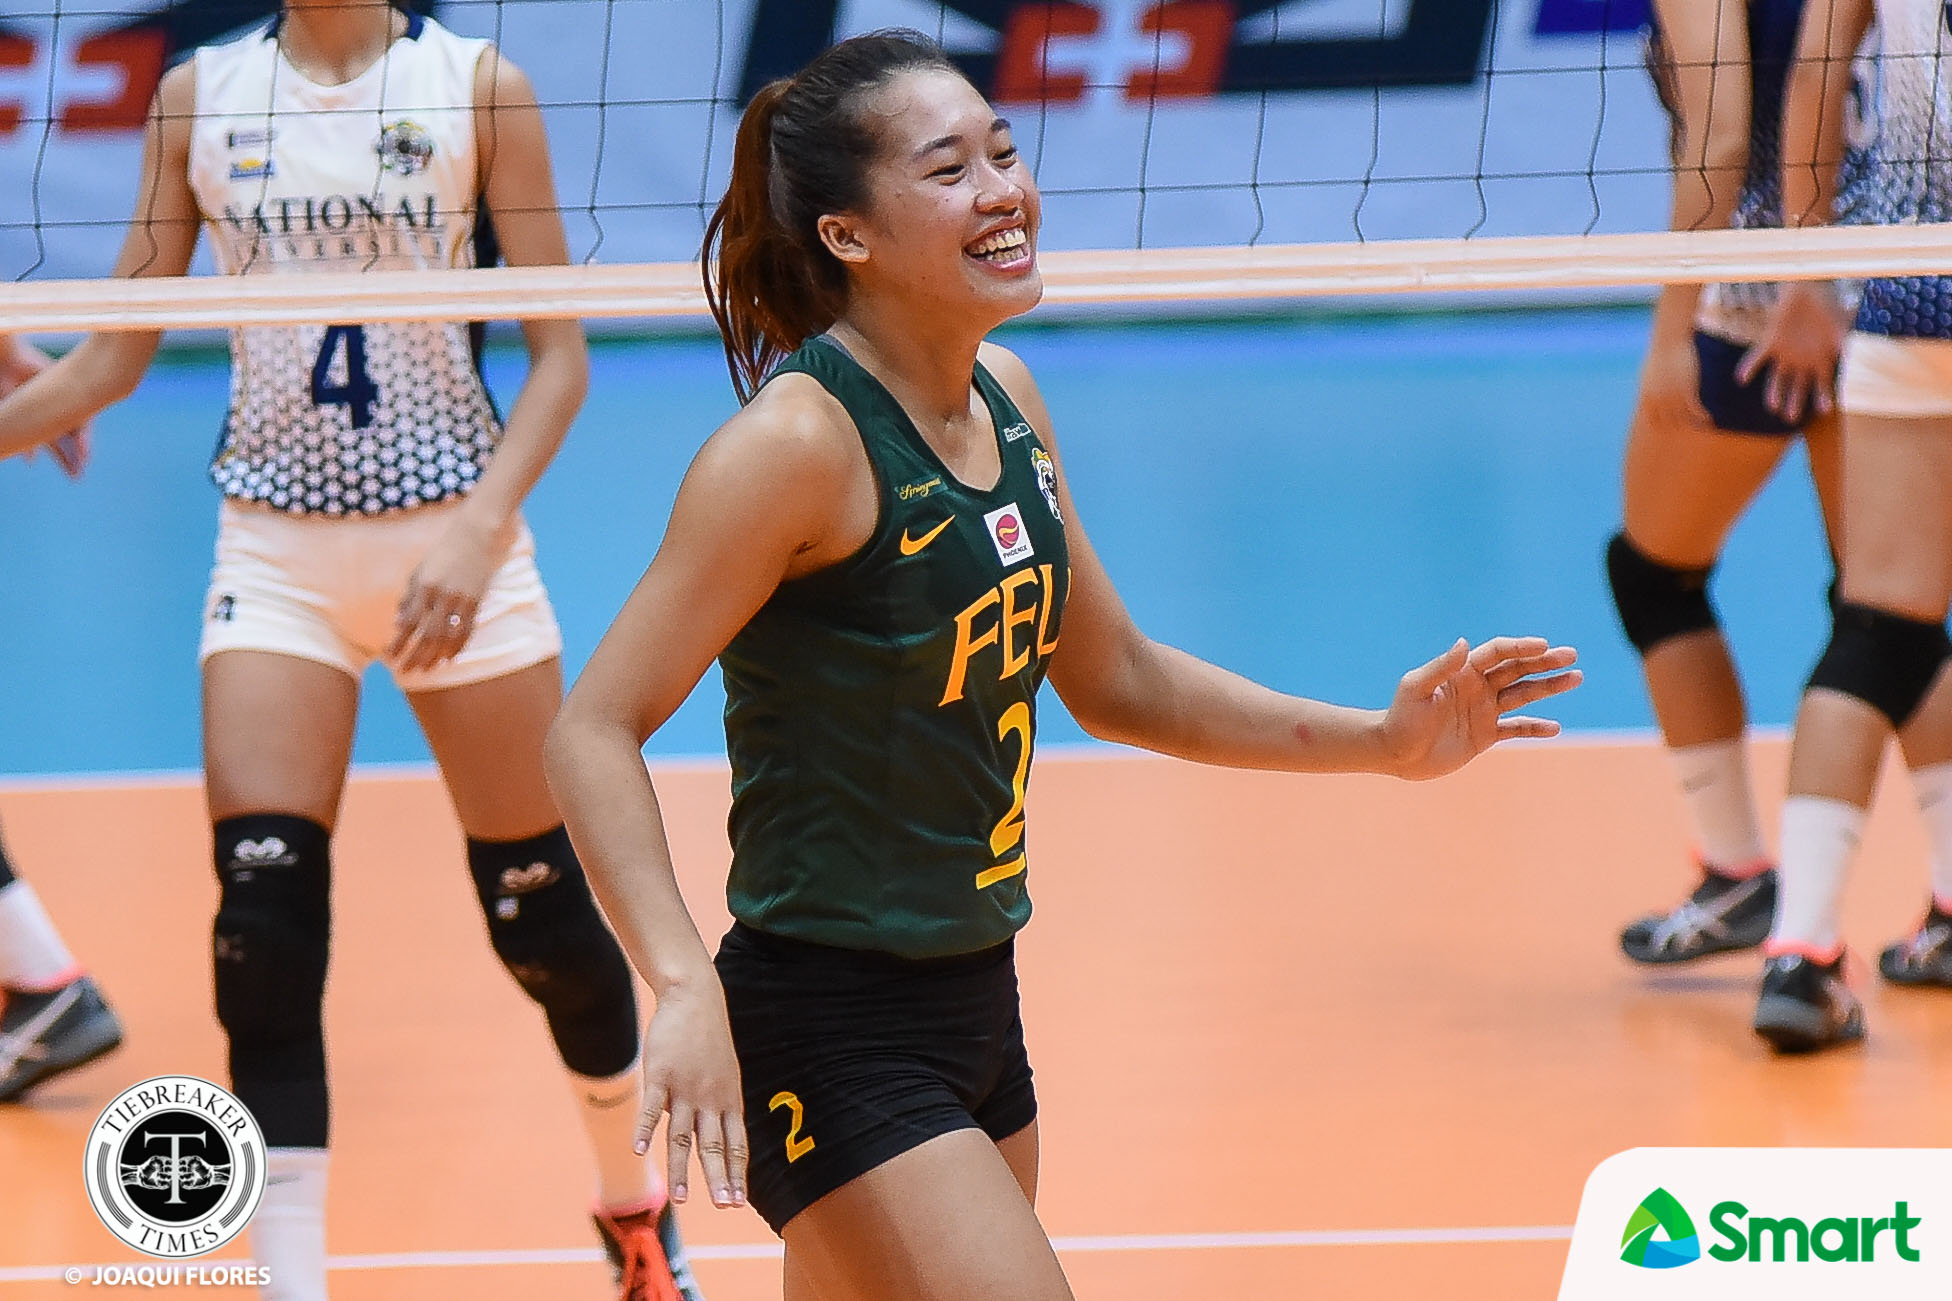 UAAP-80-Volleyball-FEU-vs.-NU-Pons-7721 George Pascua on seemingly choking himself: 'Out of nowhere yun' FEU News UAAP Volleyball  - philippine sports news